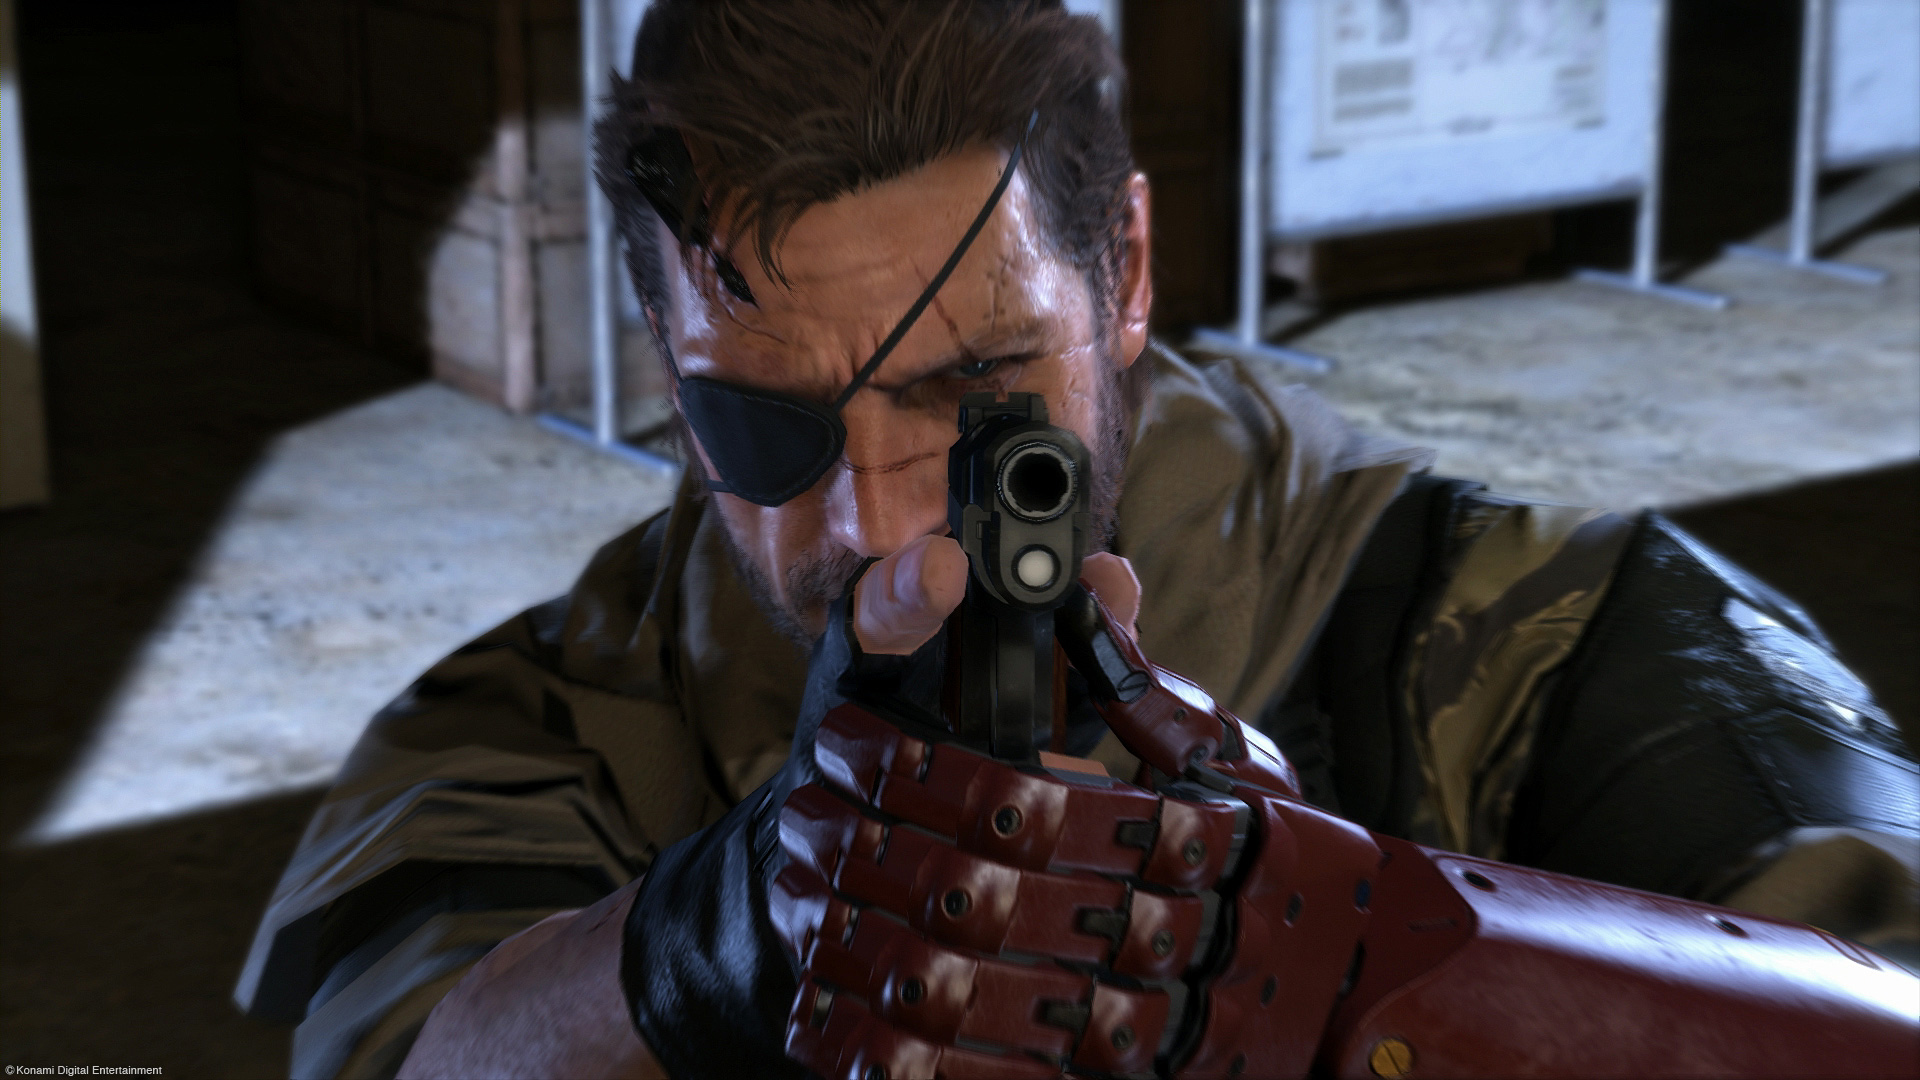 Snake takes aim with a handgun in Metal Gear Solid 5: The Phantom Pain